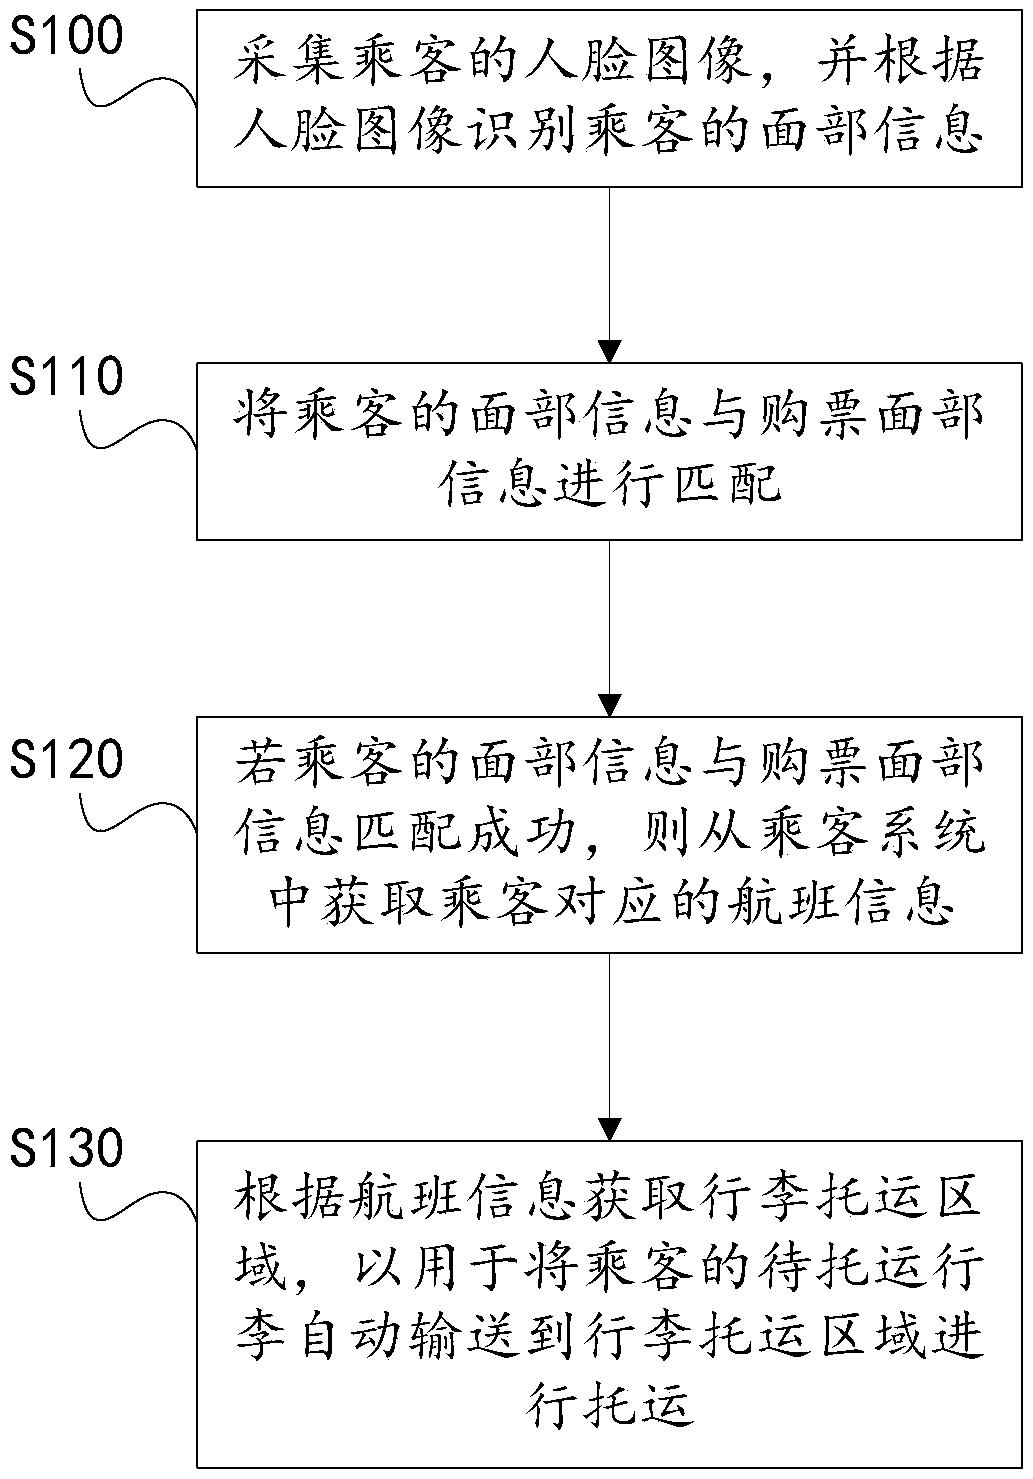 Method and device for self-check and retrieval of luggage